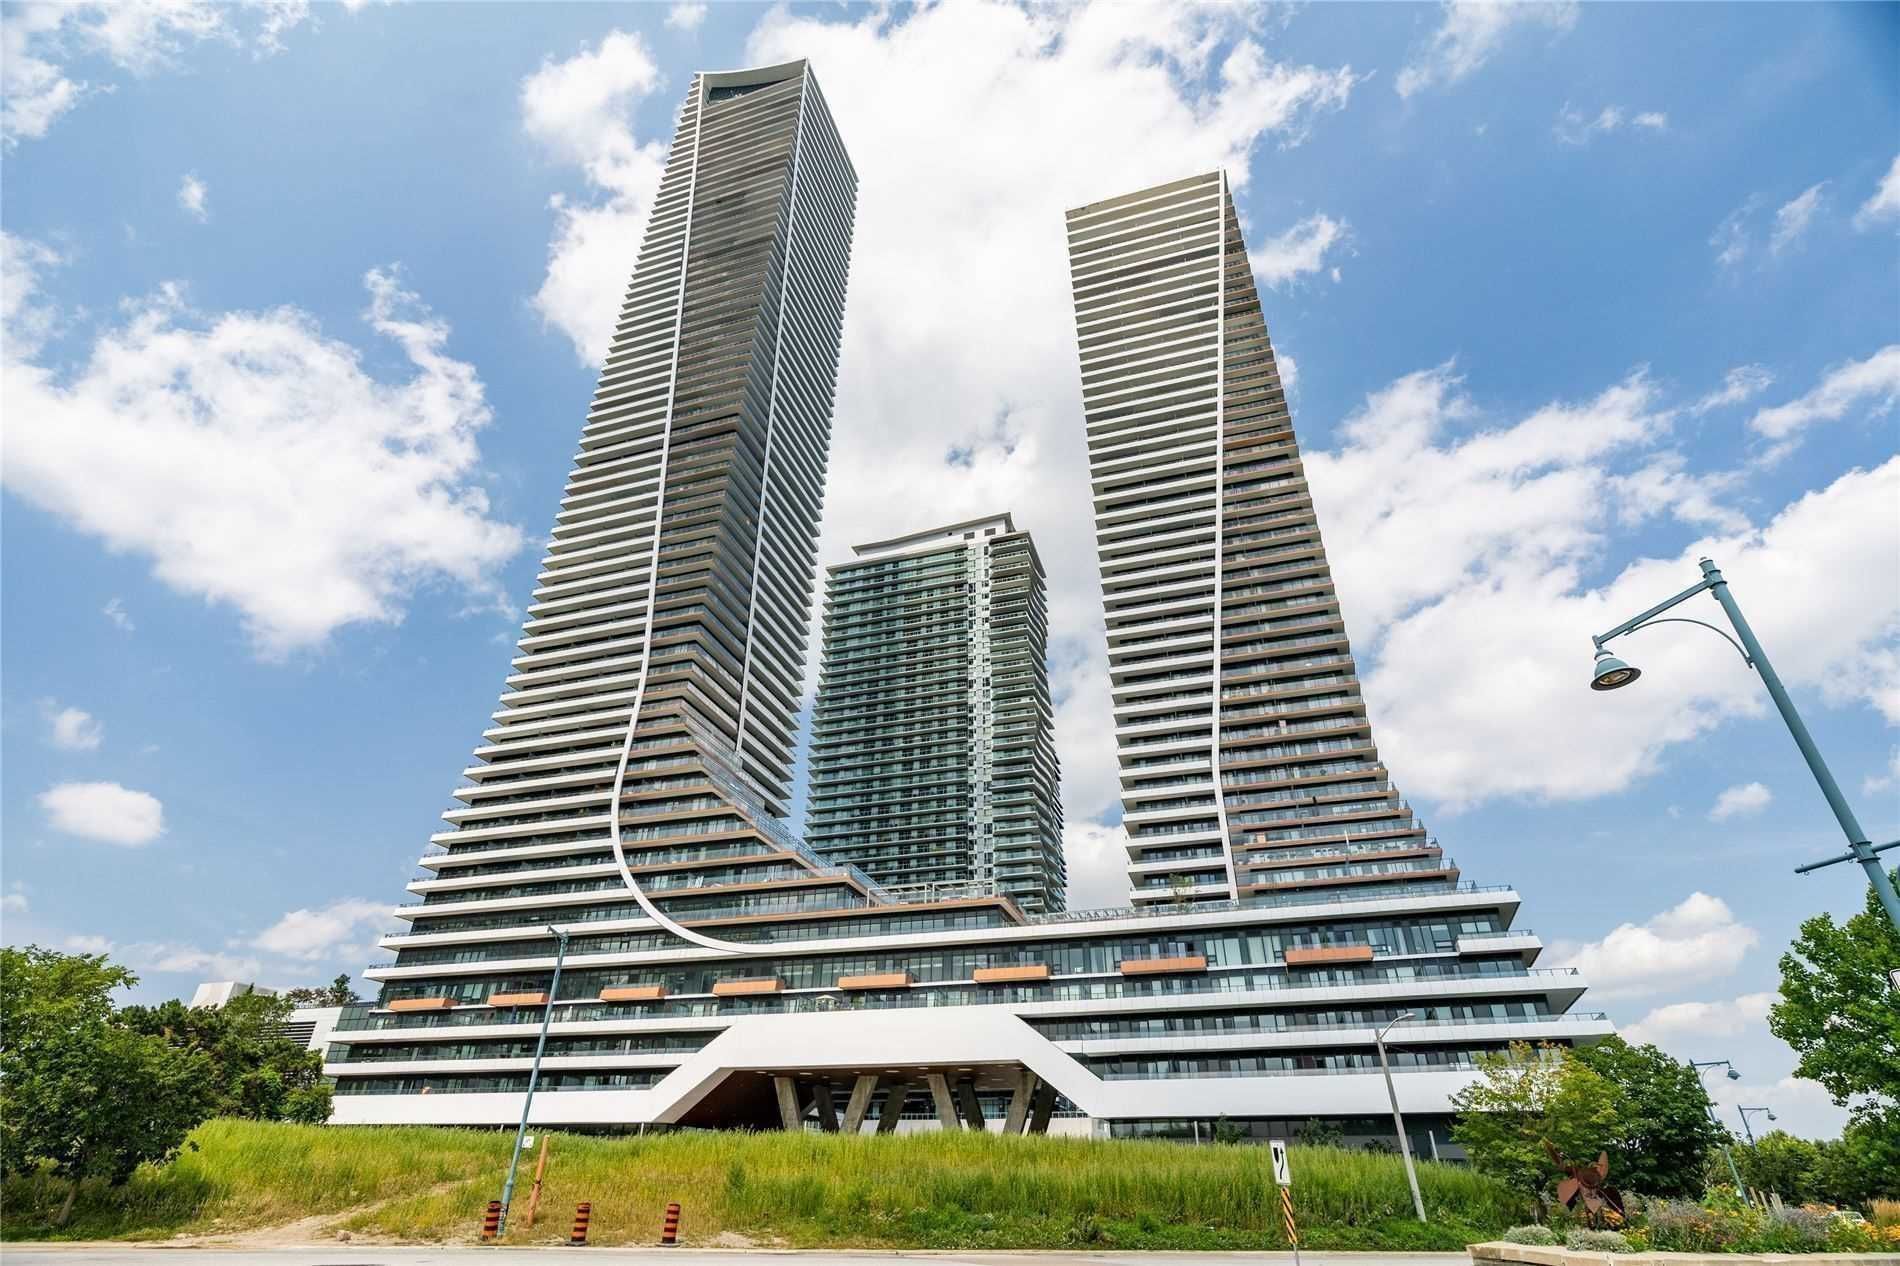 2183 Lake Shore Blvd W. This condo at Sky Tower at Eau Du Soleil Condos is located in  Etobicoke, Toronto - image #1 of 3 by Strata.ca